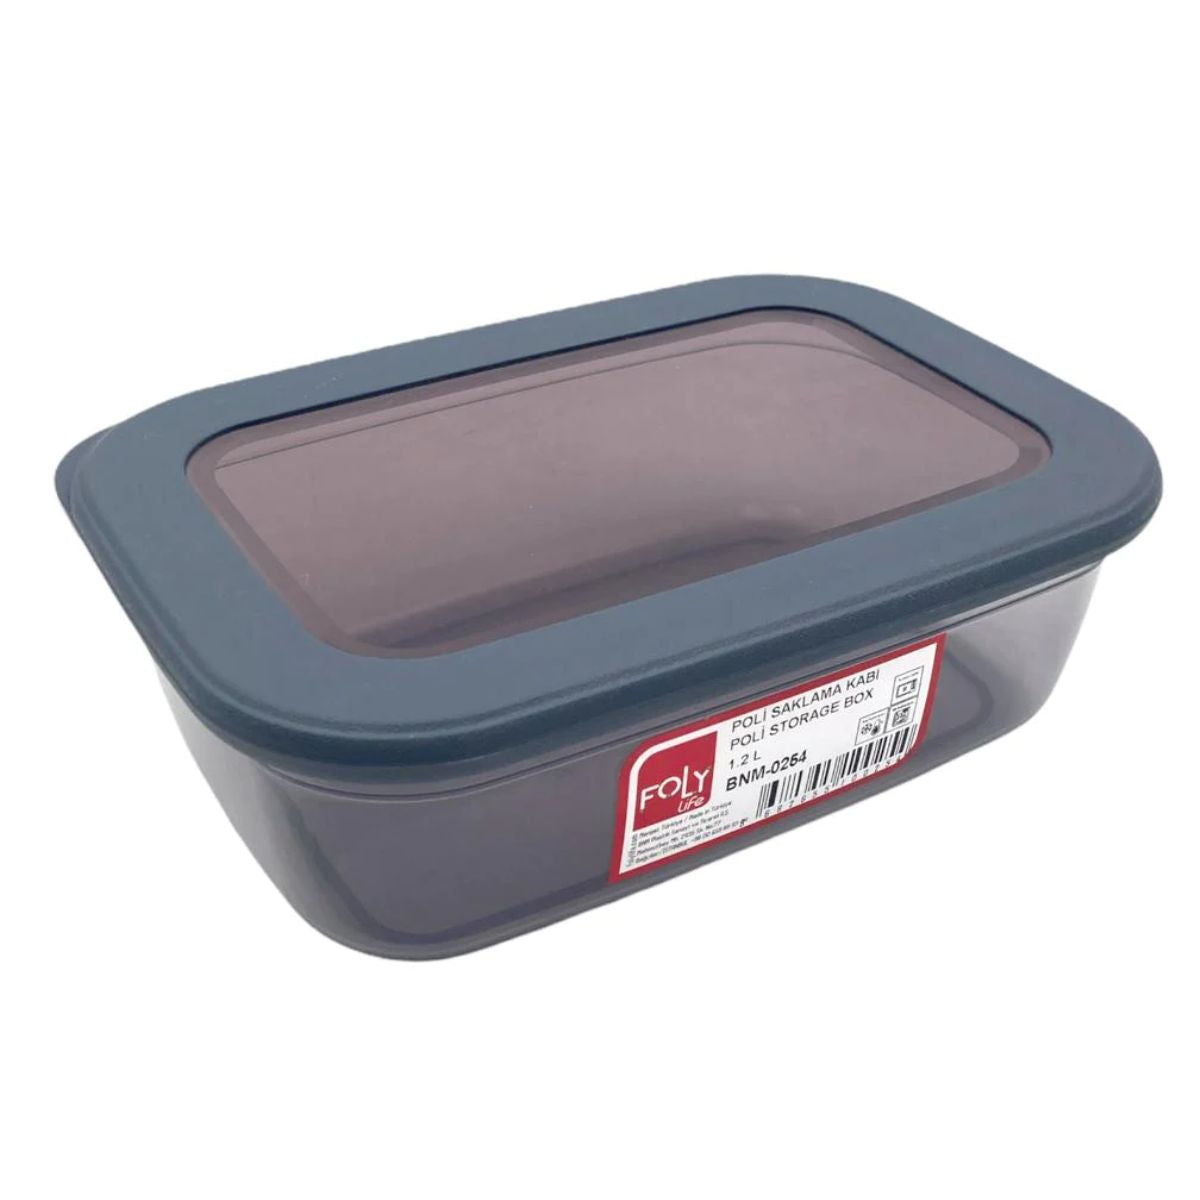 A Foly - Plastic Grey Storage Container Box - 1200ml with a lid.